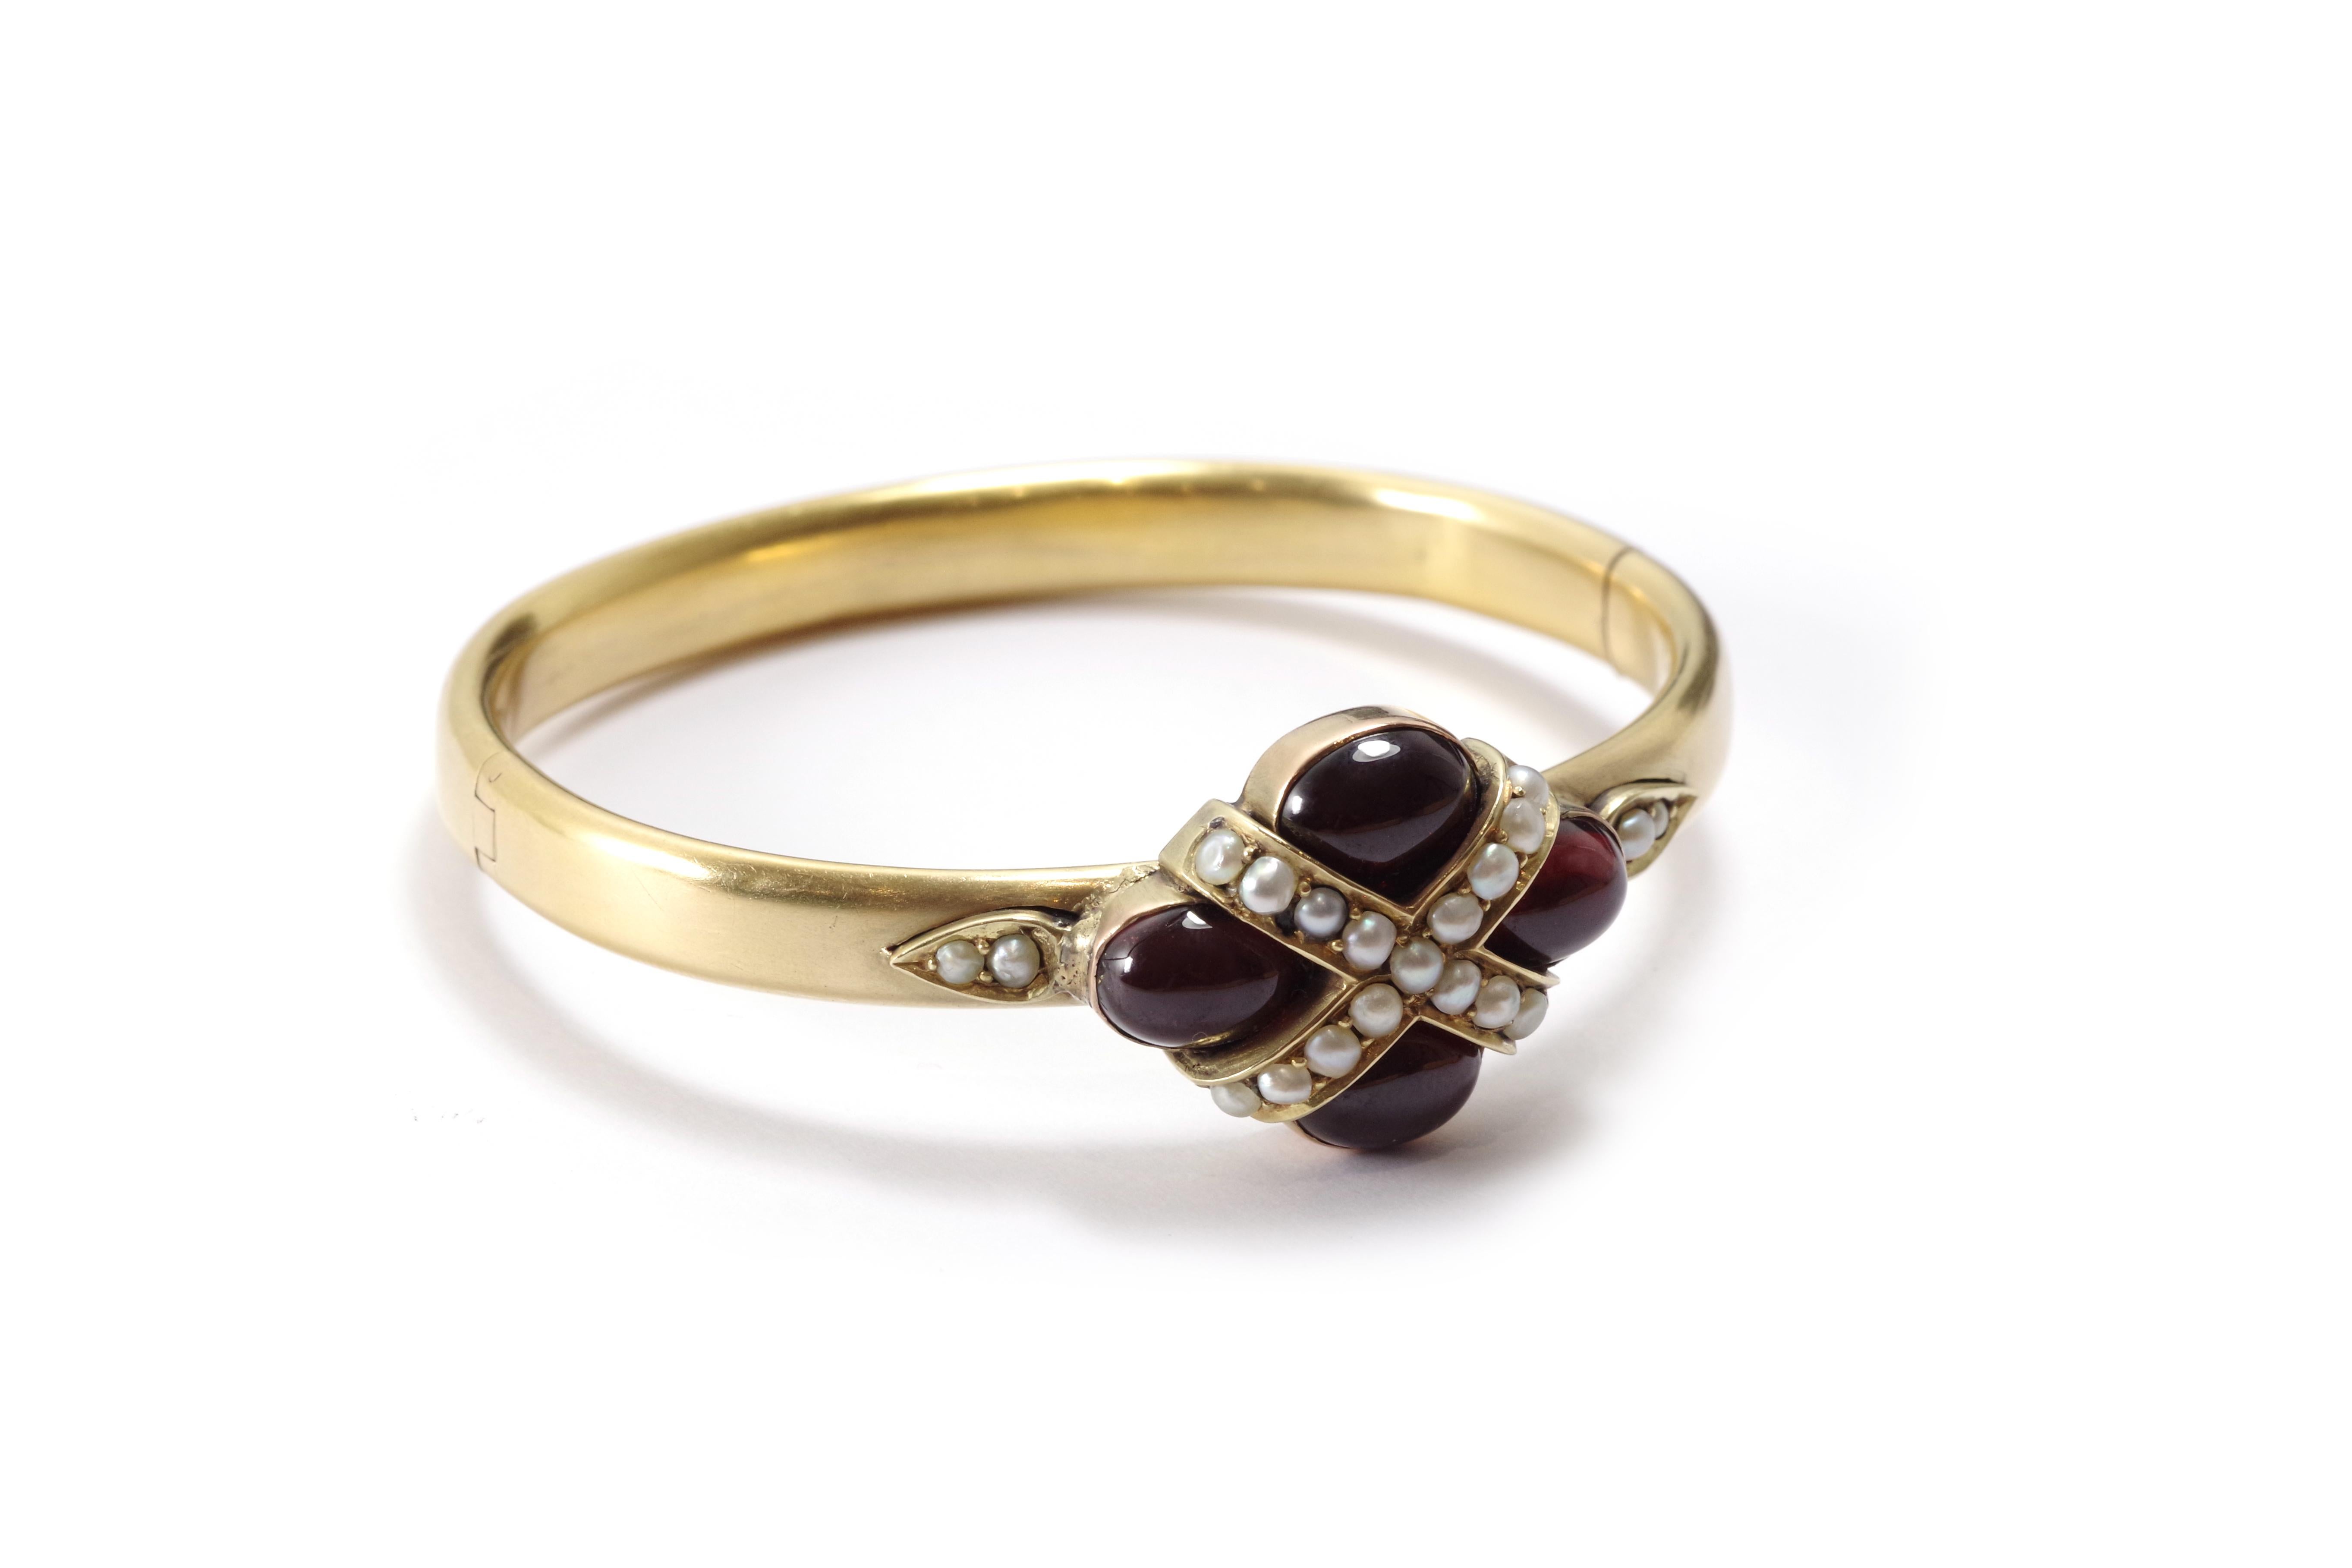 Victorian garnet bangle bracelet in 18k rose gold. Bangle bracelet featuring a central element set with four large cabochon almandine garnets, topped with a cross set with 18 fine pearls. A drop-shaped motif set with fine pearls complements the main